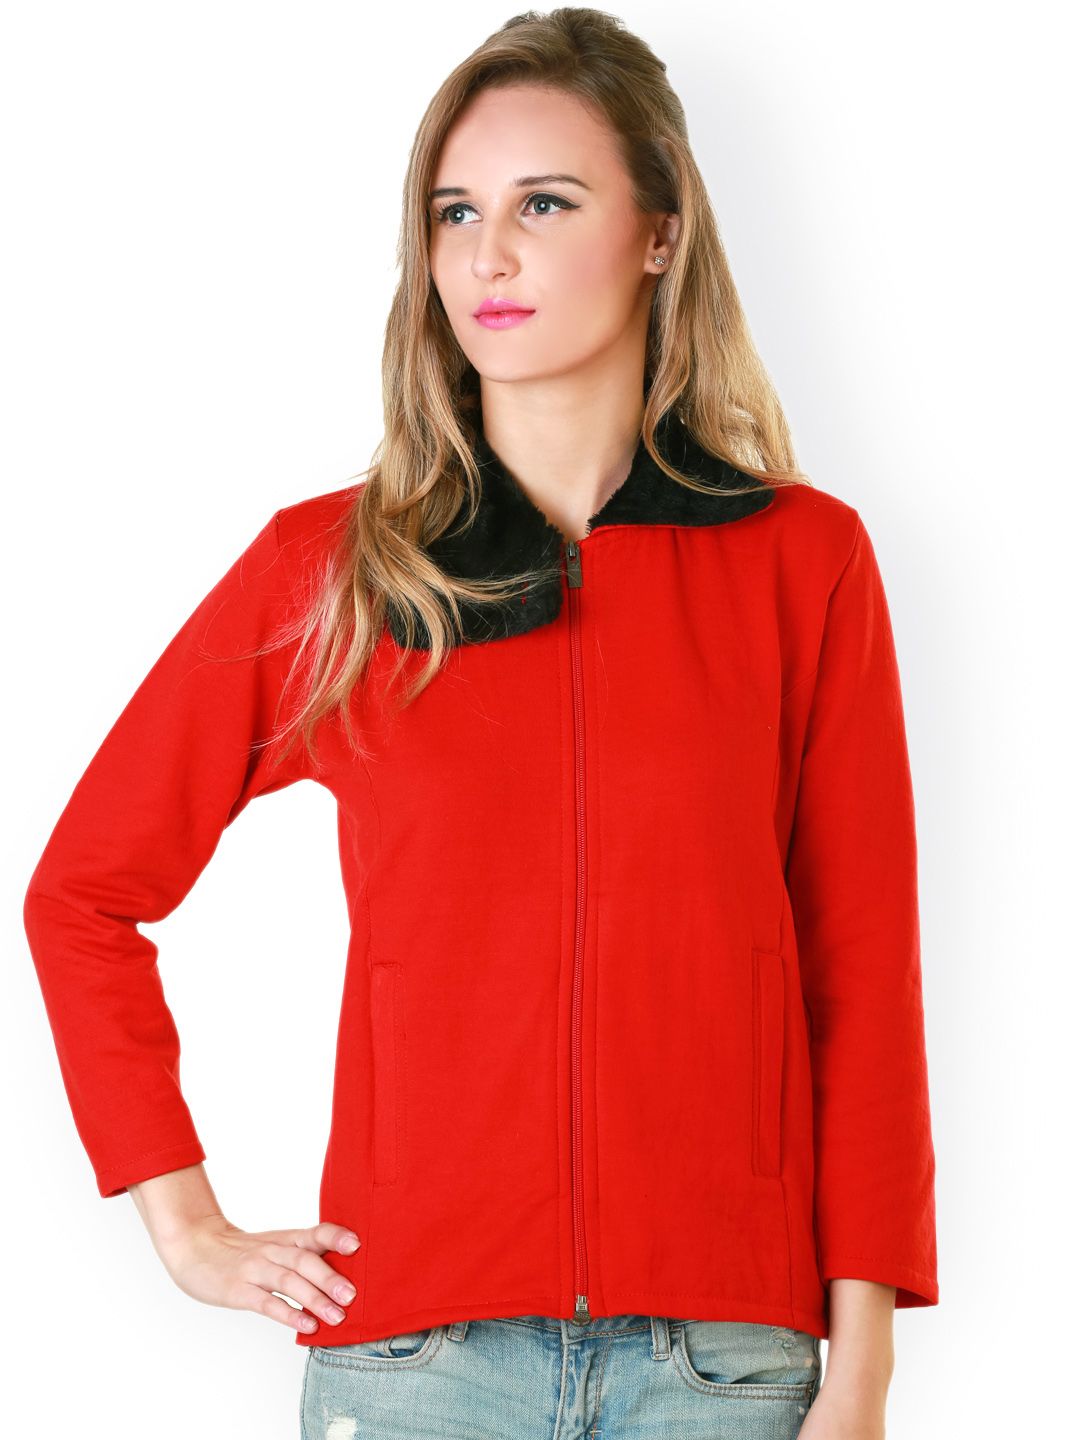 Belle Fille Red Jacket Price in India